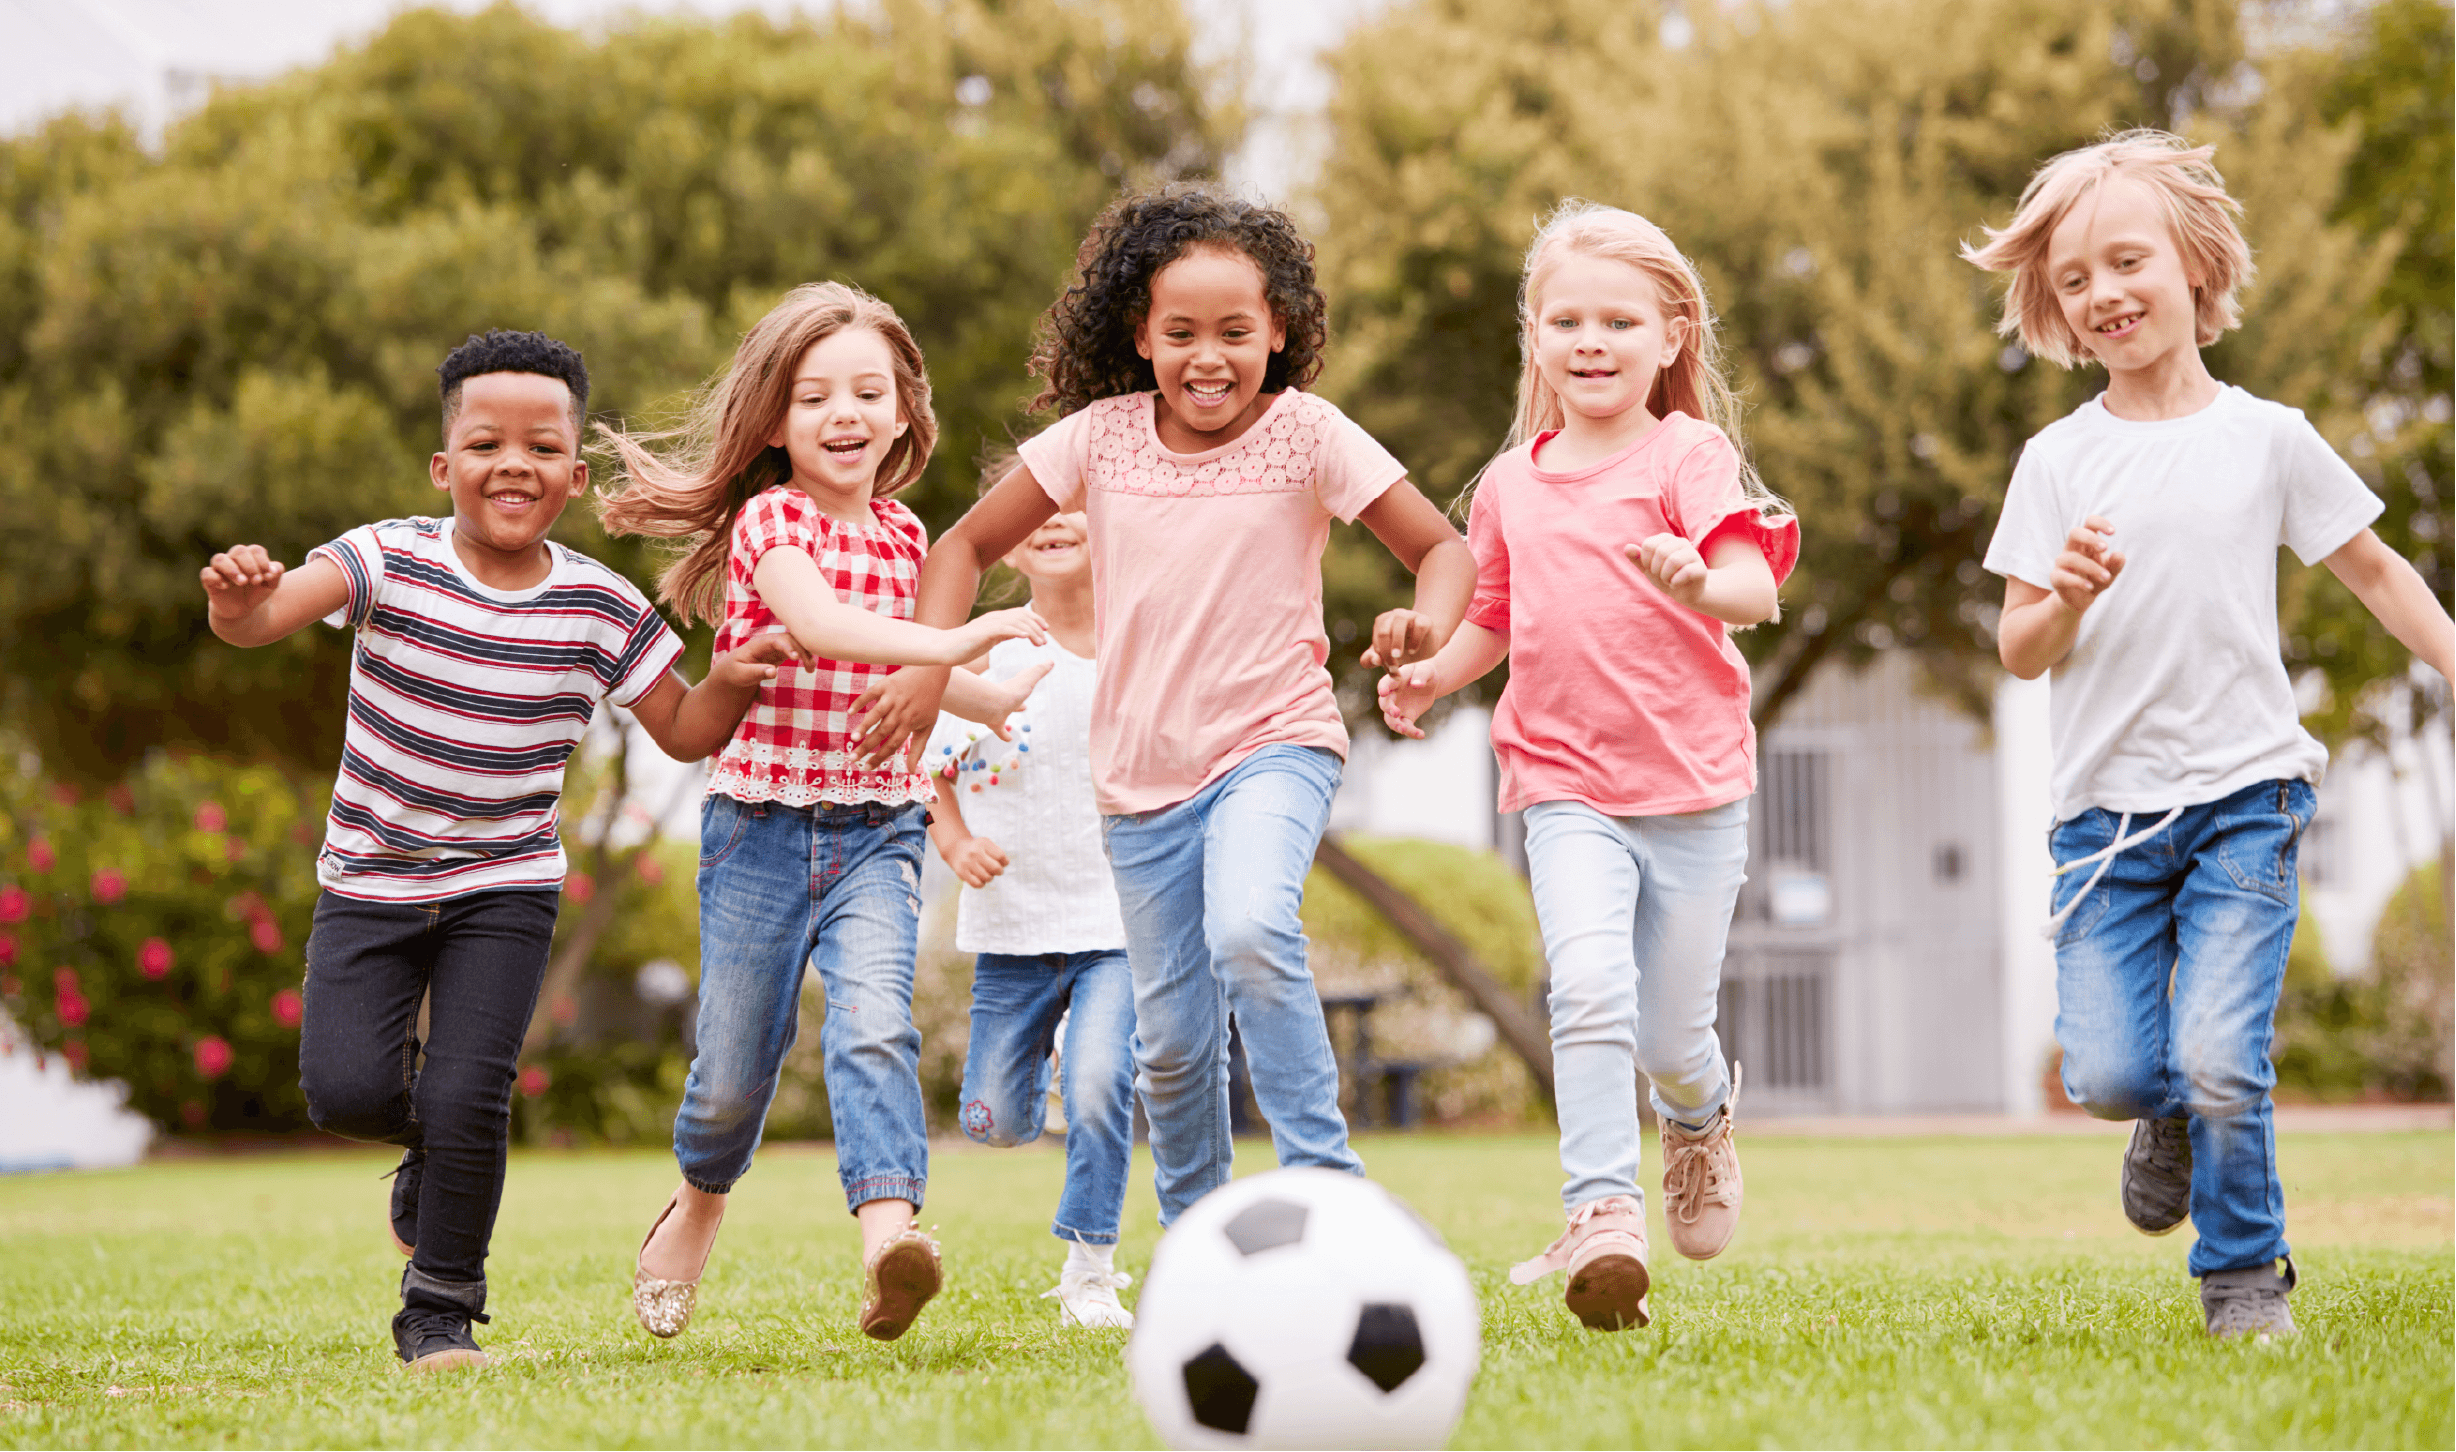 SPORTS TRAINING THAT YOUR CHILDREN WILL LOVE